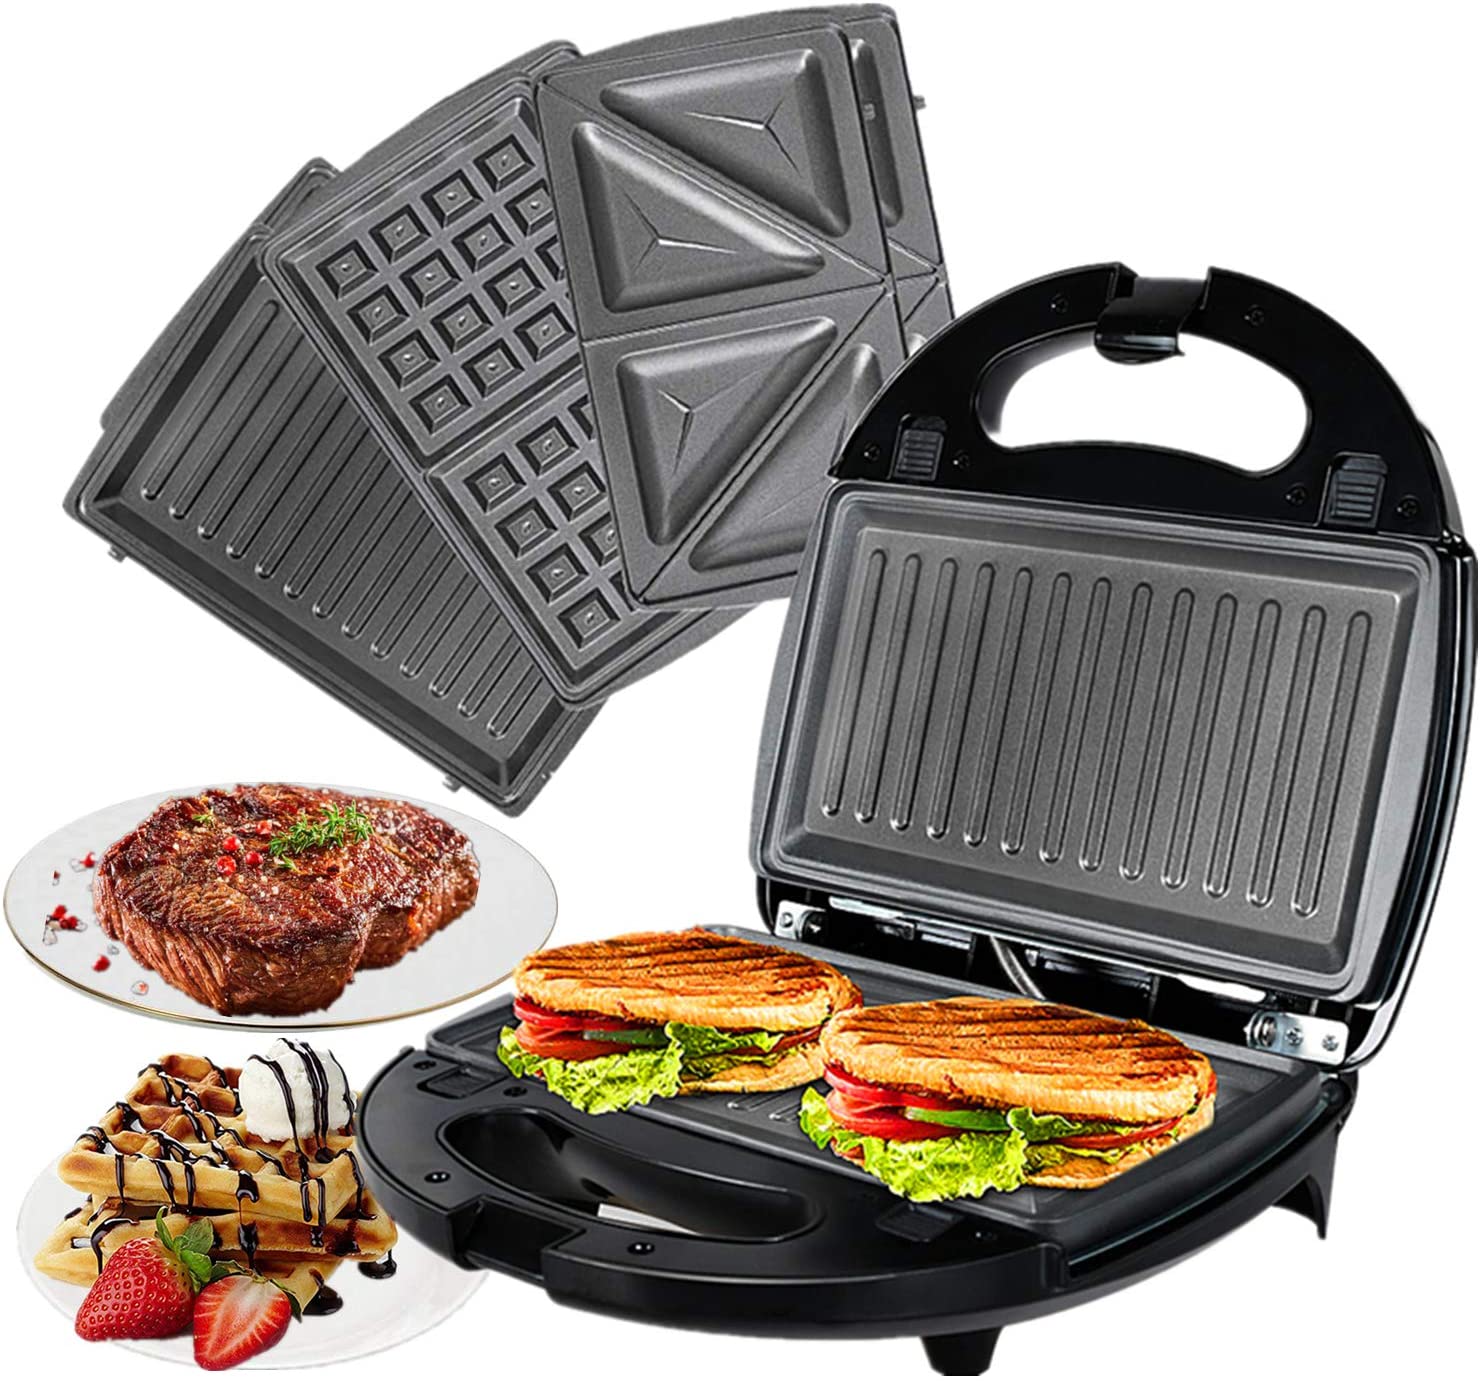 OZAVO Sandwich Maker 3 in 1, Waffles, Panini Toaster, 3 Removable Grill Plates, Table Grill for Toast, Waffles, Meat, Black, 750W